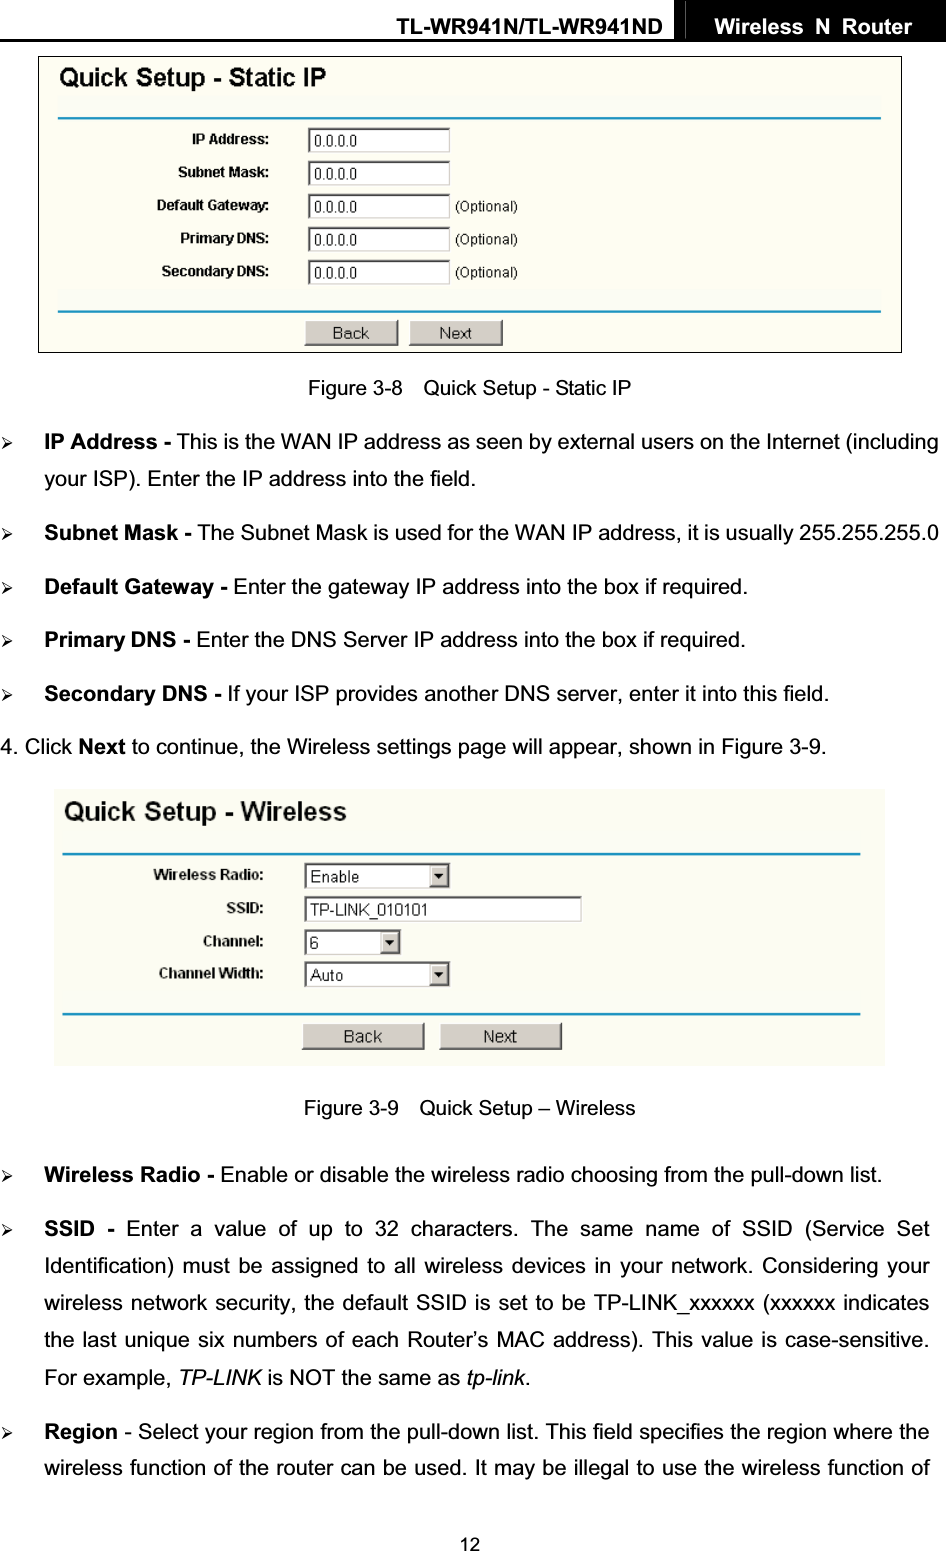 TL-WR941N/TL-WR941ND  Wireless N Router  12Figure 3-8    Quick Setup - Static IP ¾IP Address - This is the WAN IP address as seen by external users on the Internet (including your ISP). Enter the IP address into the field. ¾Subnet Mask - The Subnet Mask is used for the WAN IP address, it is usually 255.255.255.0 ¾Default Gateway - Enter the gateway IP address into the box if required. ¾Primary DNS - Enter the DNS Server IP address into the box if required. ¾Secondary DNS - If your ISP provides another DNS server, enter it into this field.4. Click Next to continue, the Wireless settings page will appear, shown in Figure 3-9. Figure 3-9    Quick Setup – Wireless ¾Wireless Radio - Enable or disable the wireless radio choosing from the pull-down list. ¾SSID - Enter a value of up to 32 characters. The same name of SSID (Service Set Identification) must be assigned to all wireless devices in your network. Considering your wireless network security, the default SSID is set to be TP-LINK_xxxxxx (xxxxxx indicates the last unique six numbers of each Router’s MAC address). This value is case-sensitive. For example, TP-LINK is NOT the same as tp-link.¾Region - Select your region from the pull-down list. This field specifies the region where the wireless function of the router can be used. It may be illegal to use the wireless function of 